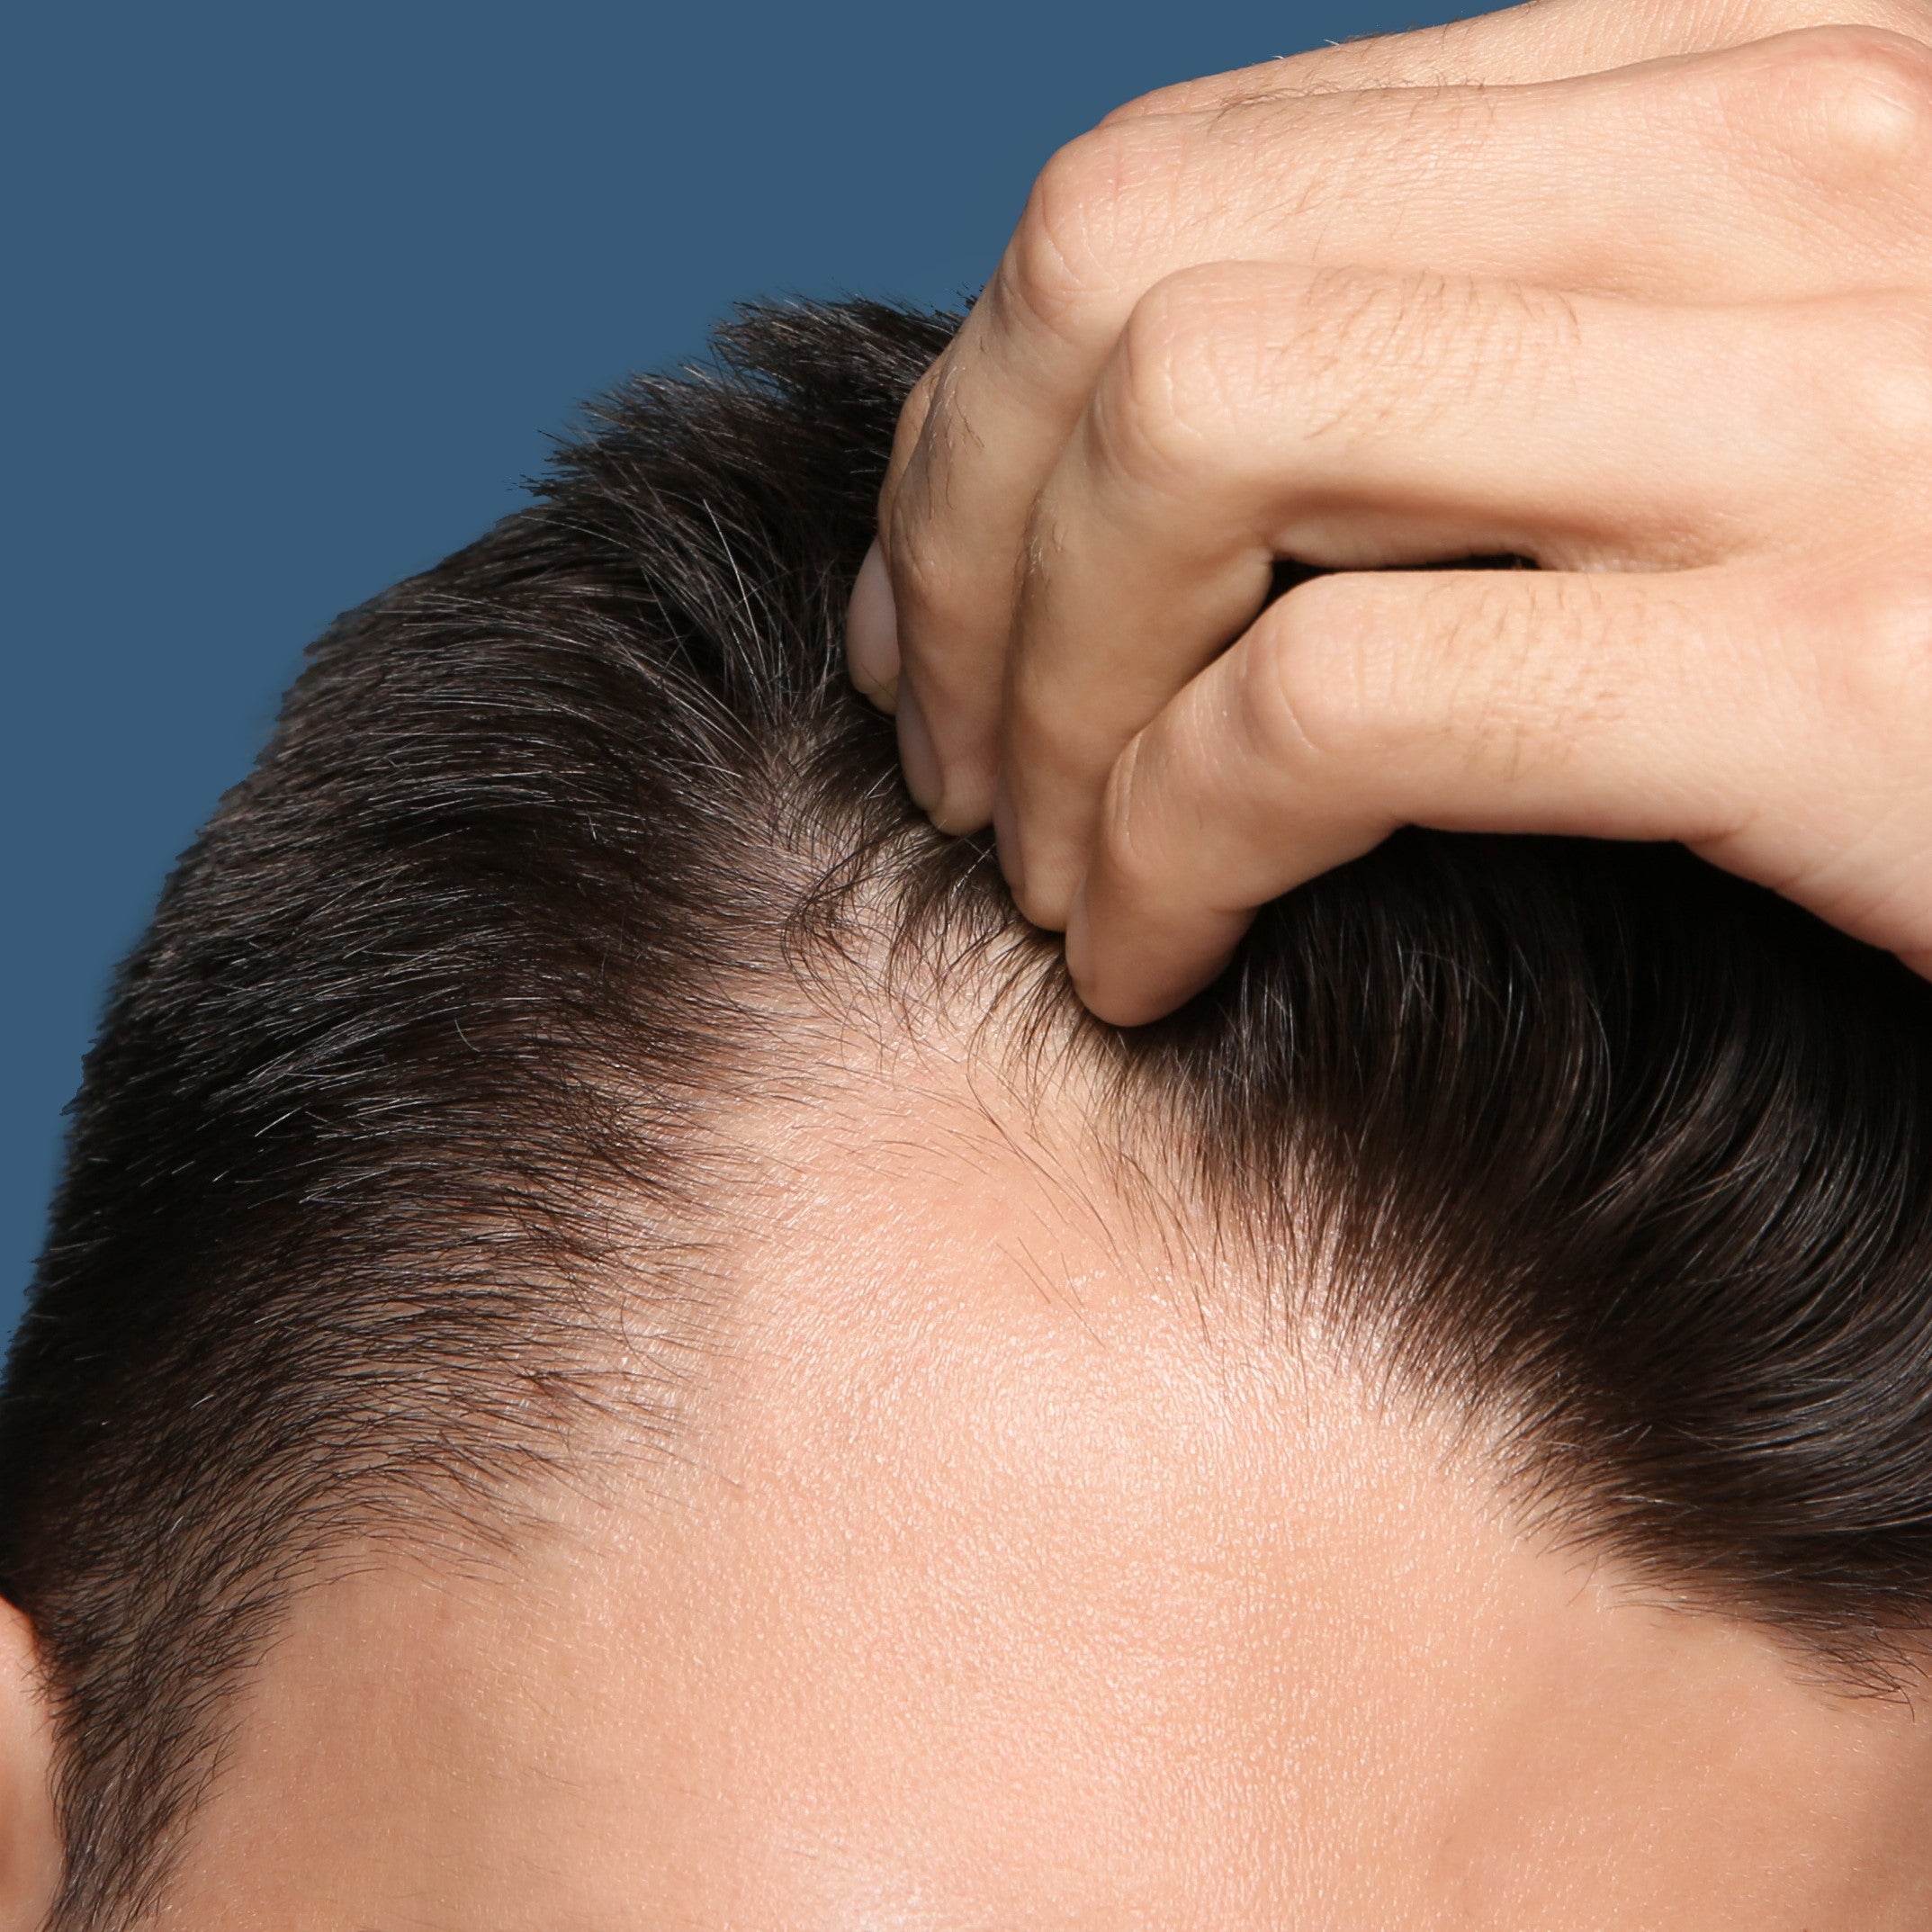 The Signs of Hair Loss in Men (It's More Than Thinning Hair)